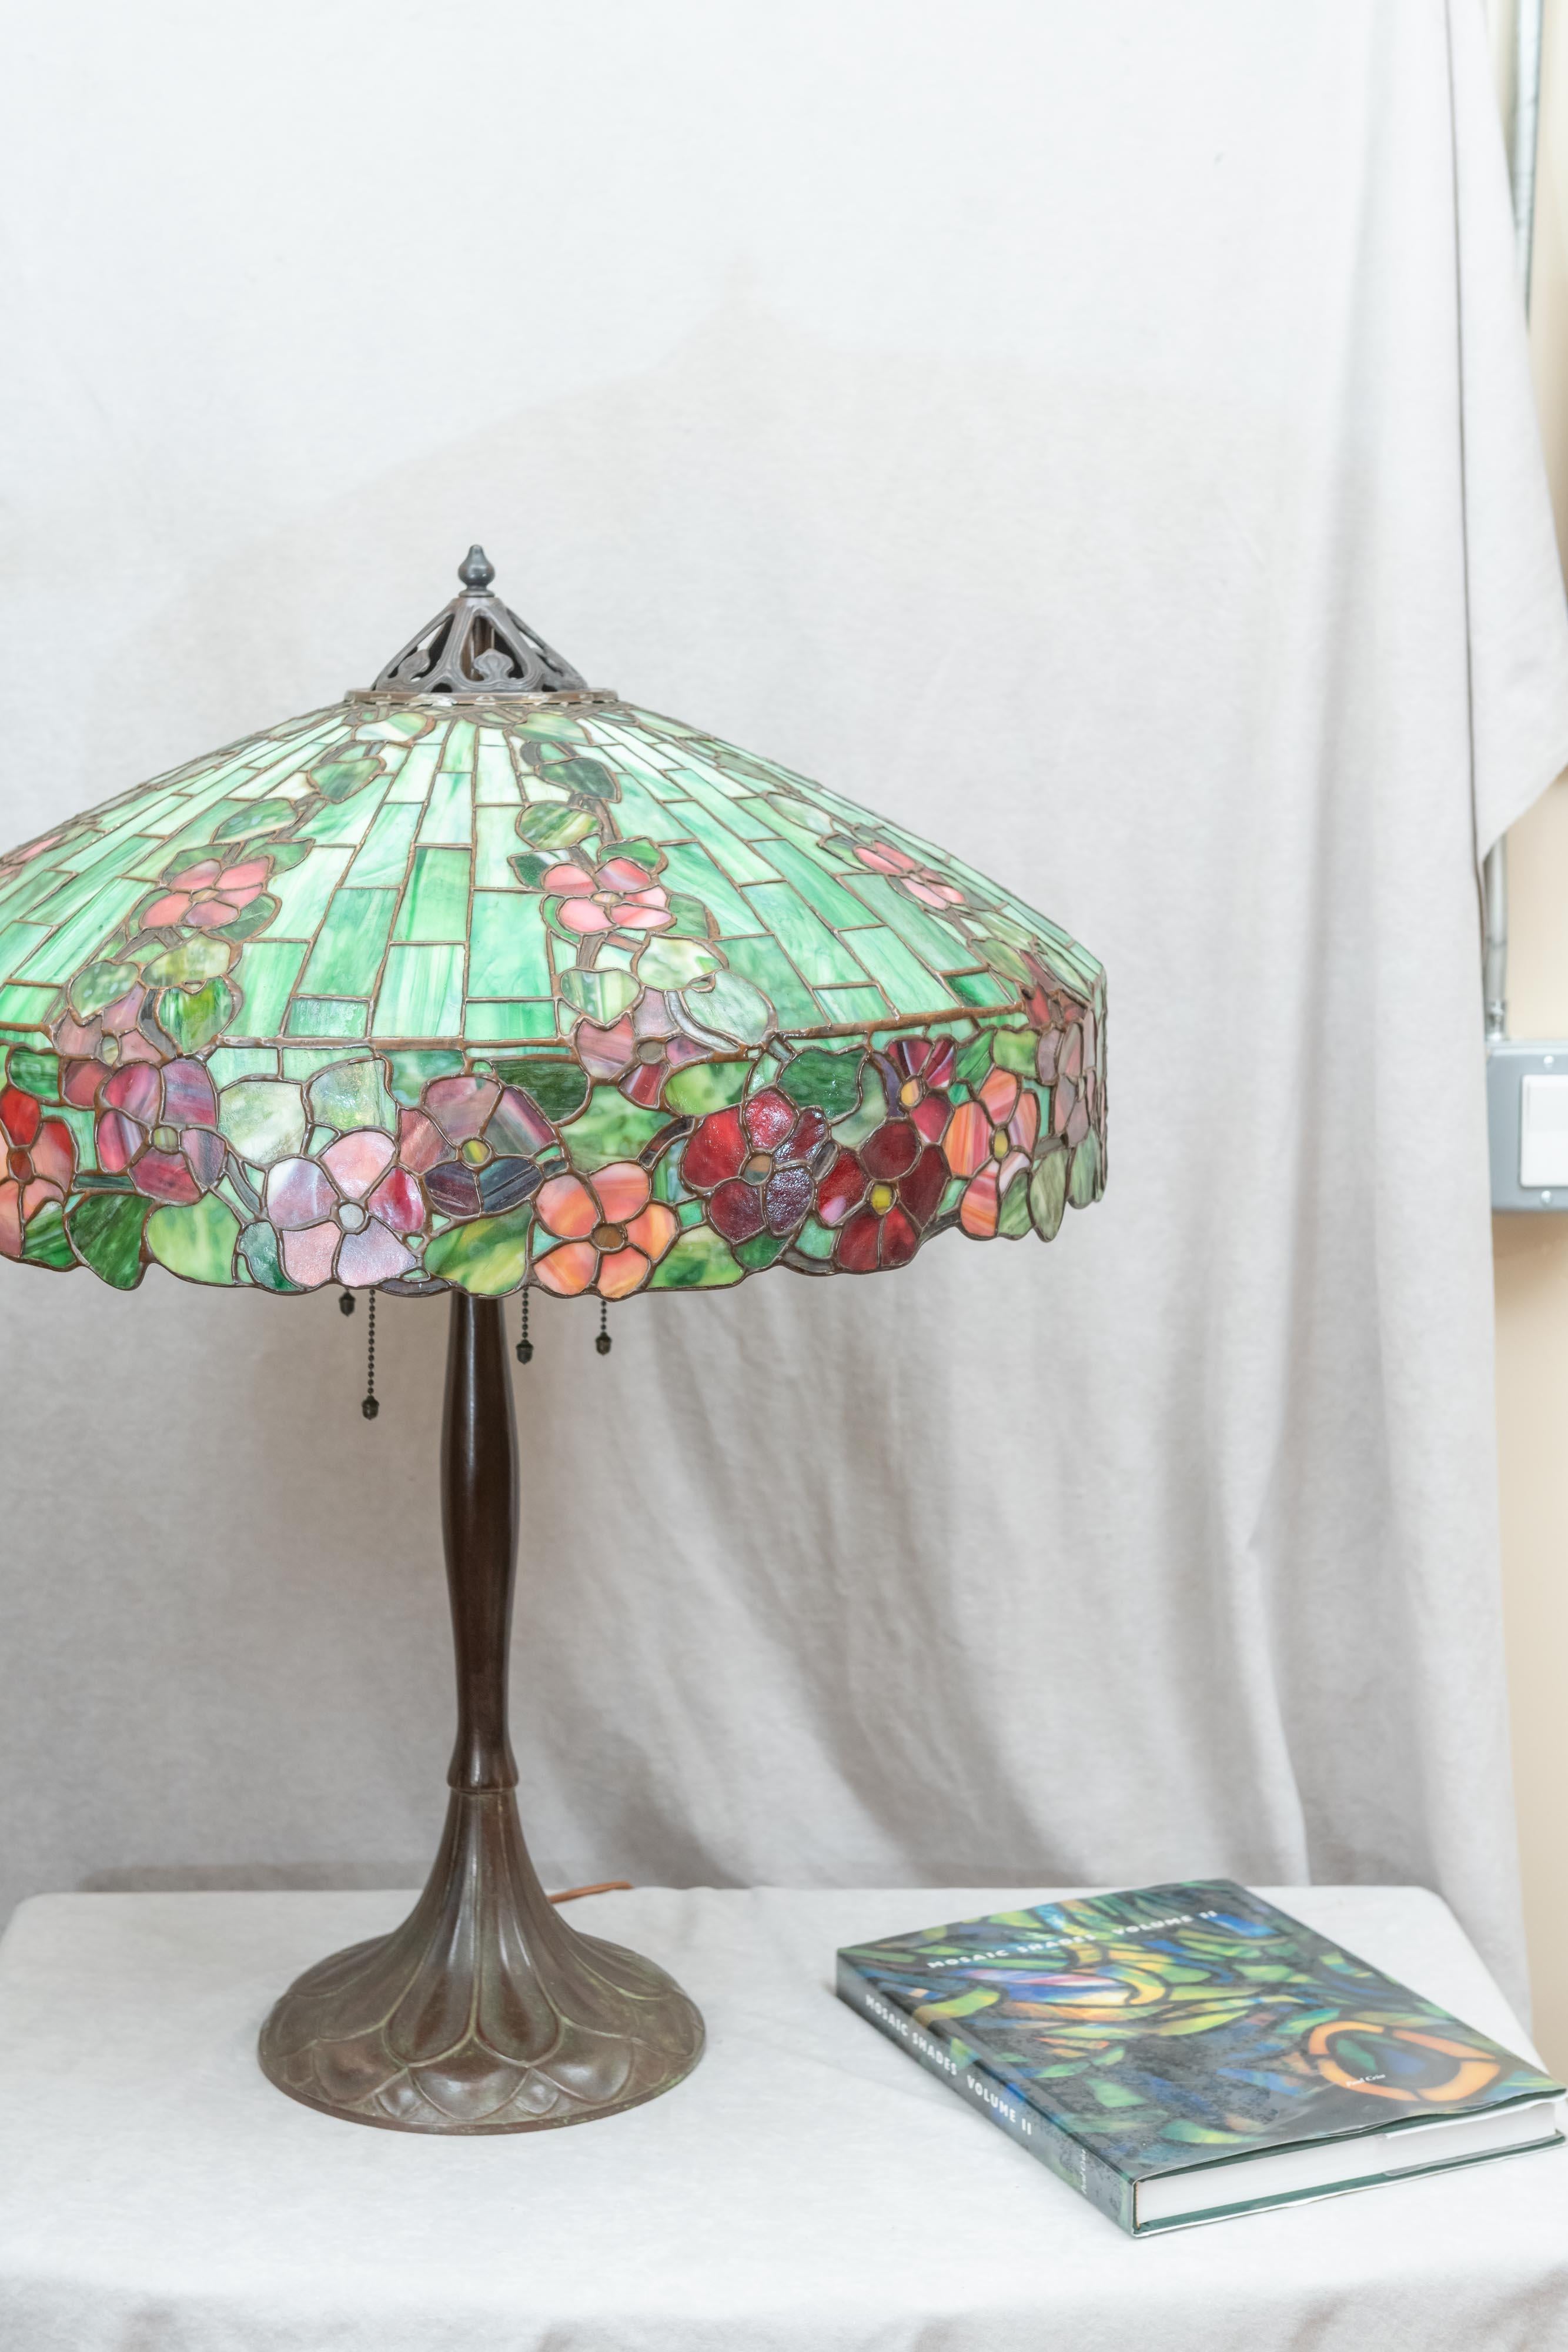 Early 20th Century Leaded Glass Table Lamp by Handel, circa 1905